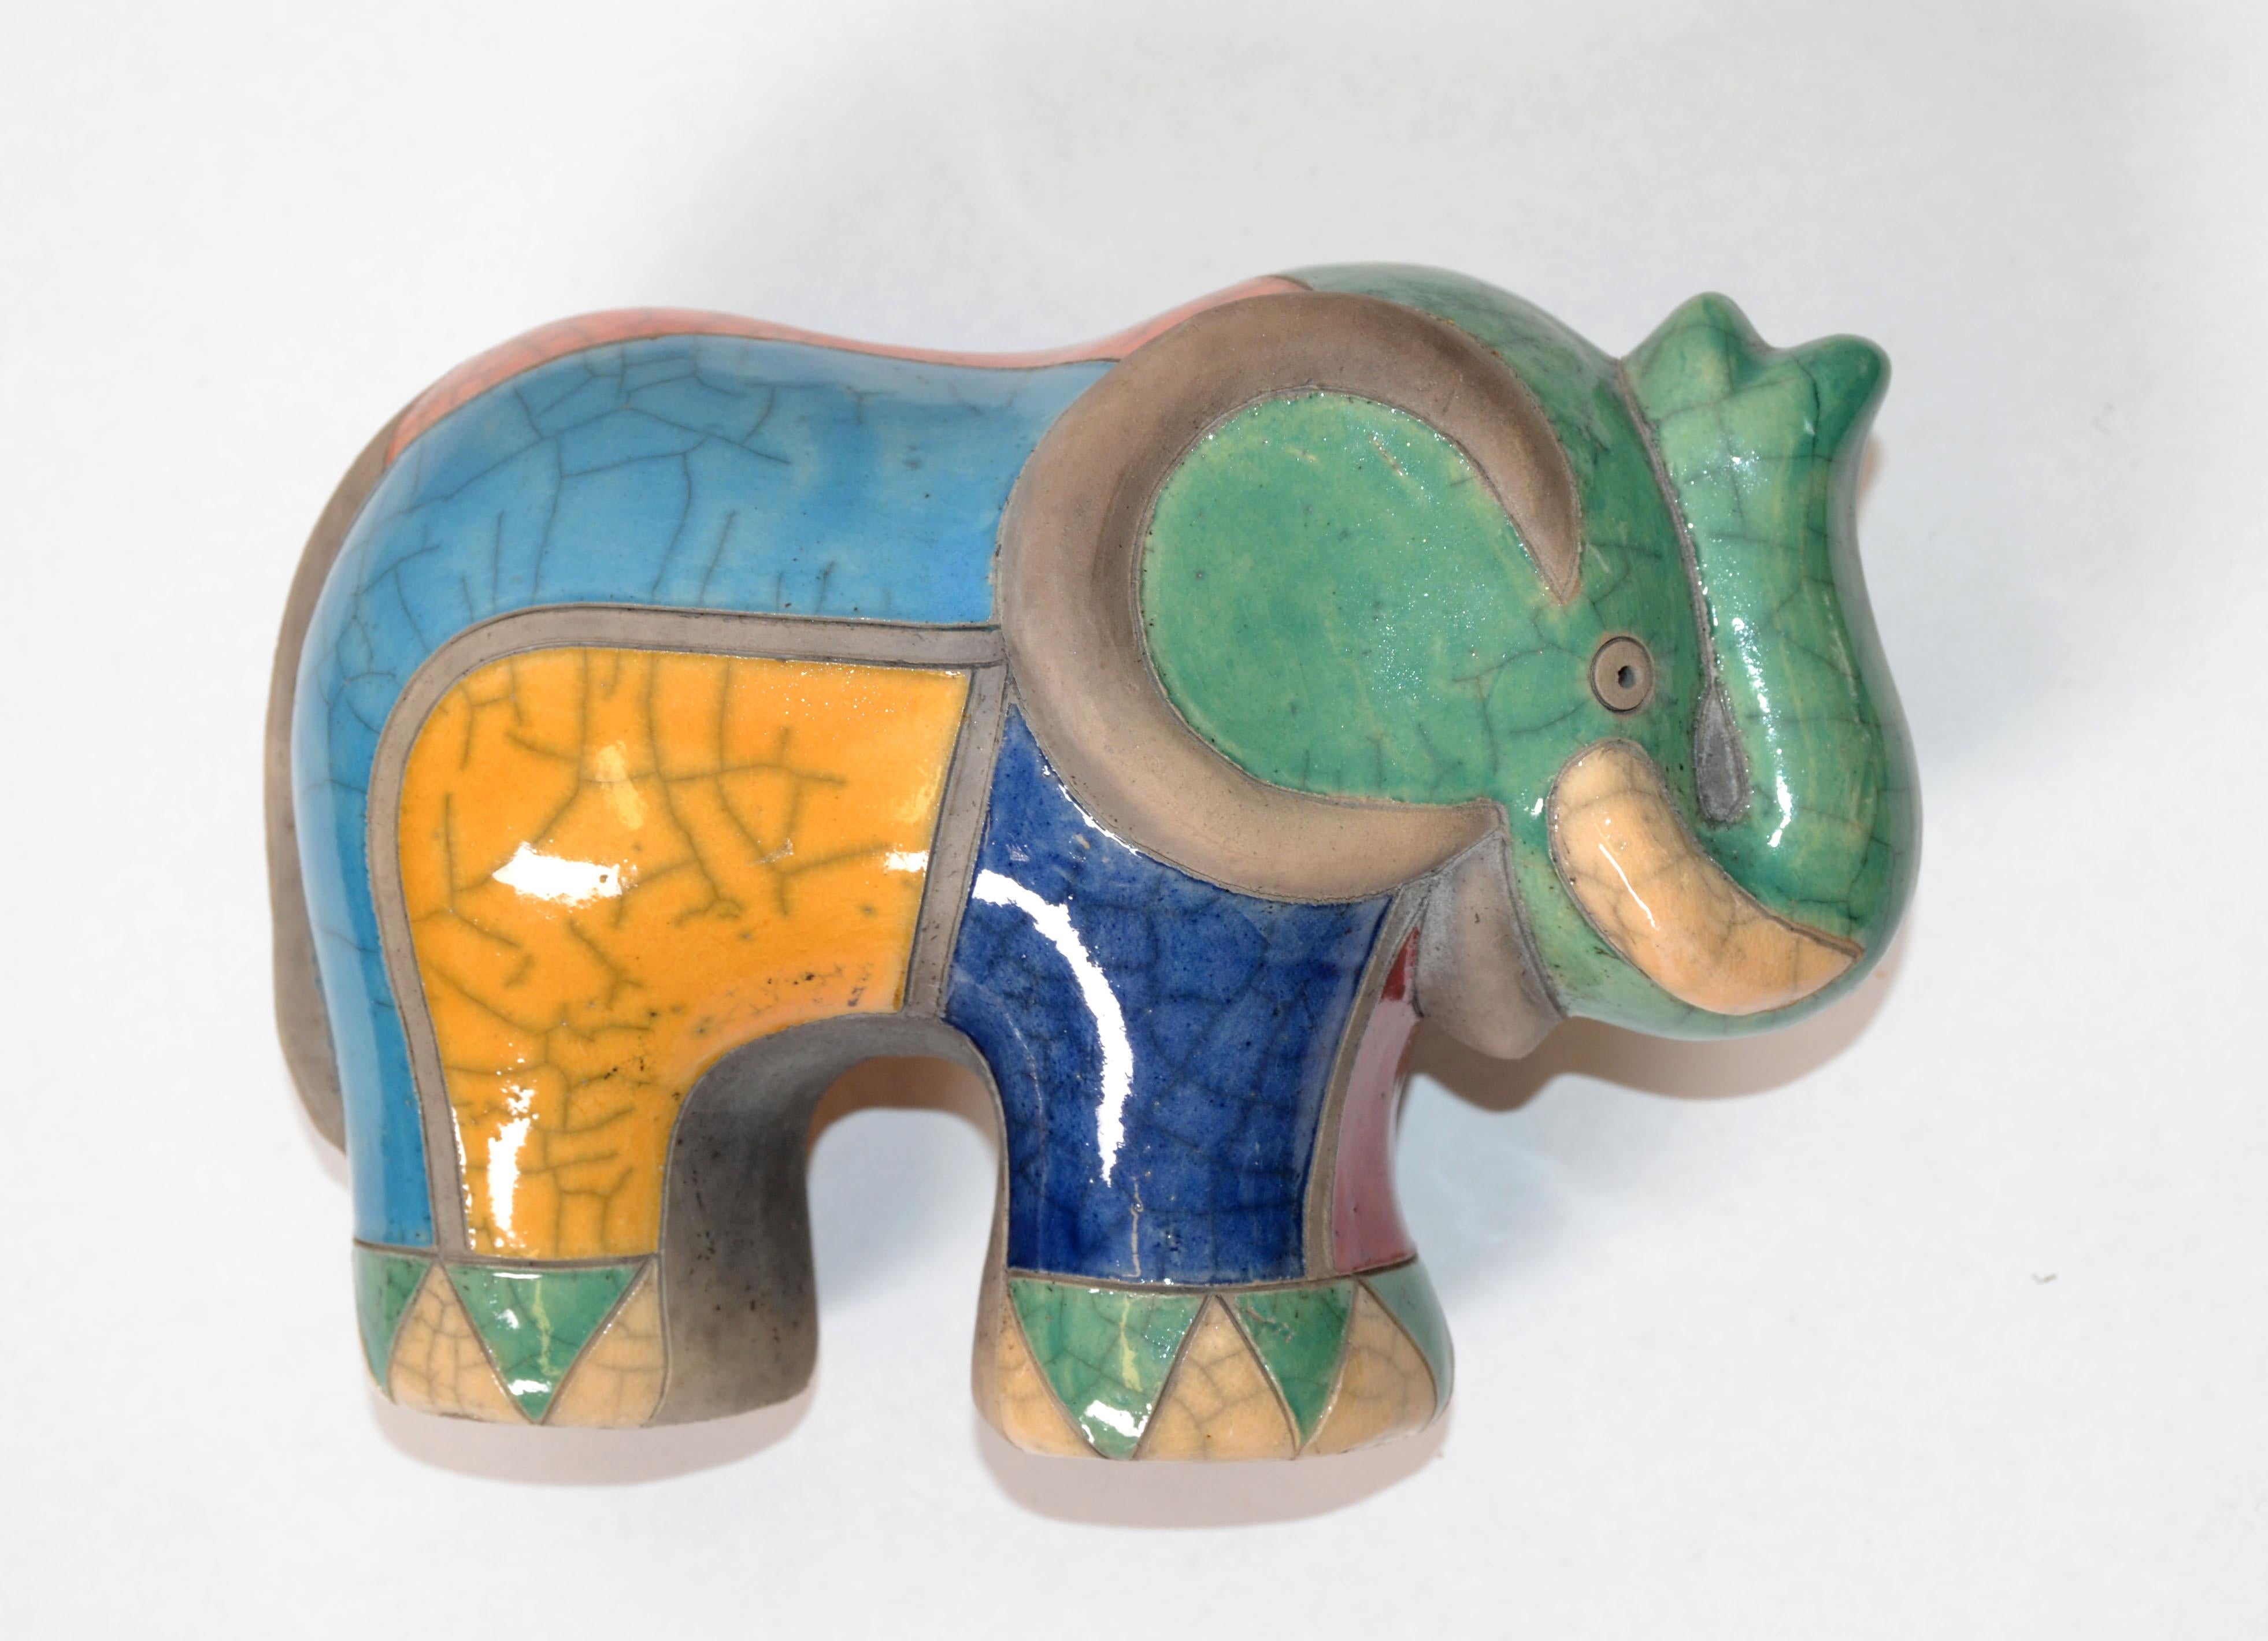 Luca CL Marked Colorful Ceramic Elephant Sculpture Mid-Century Modern Italy 1970 For Sale 1